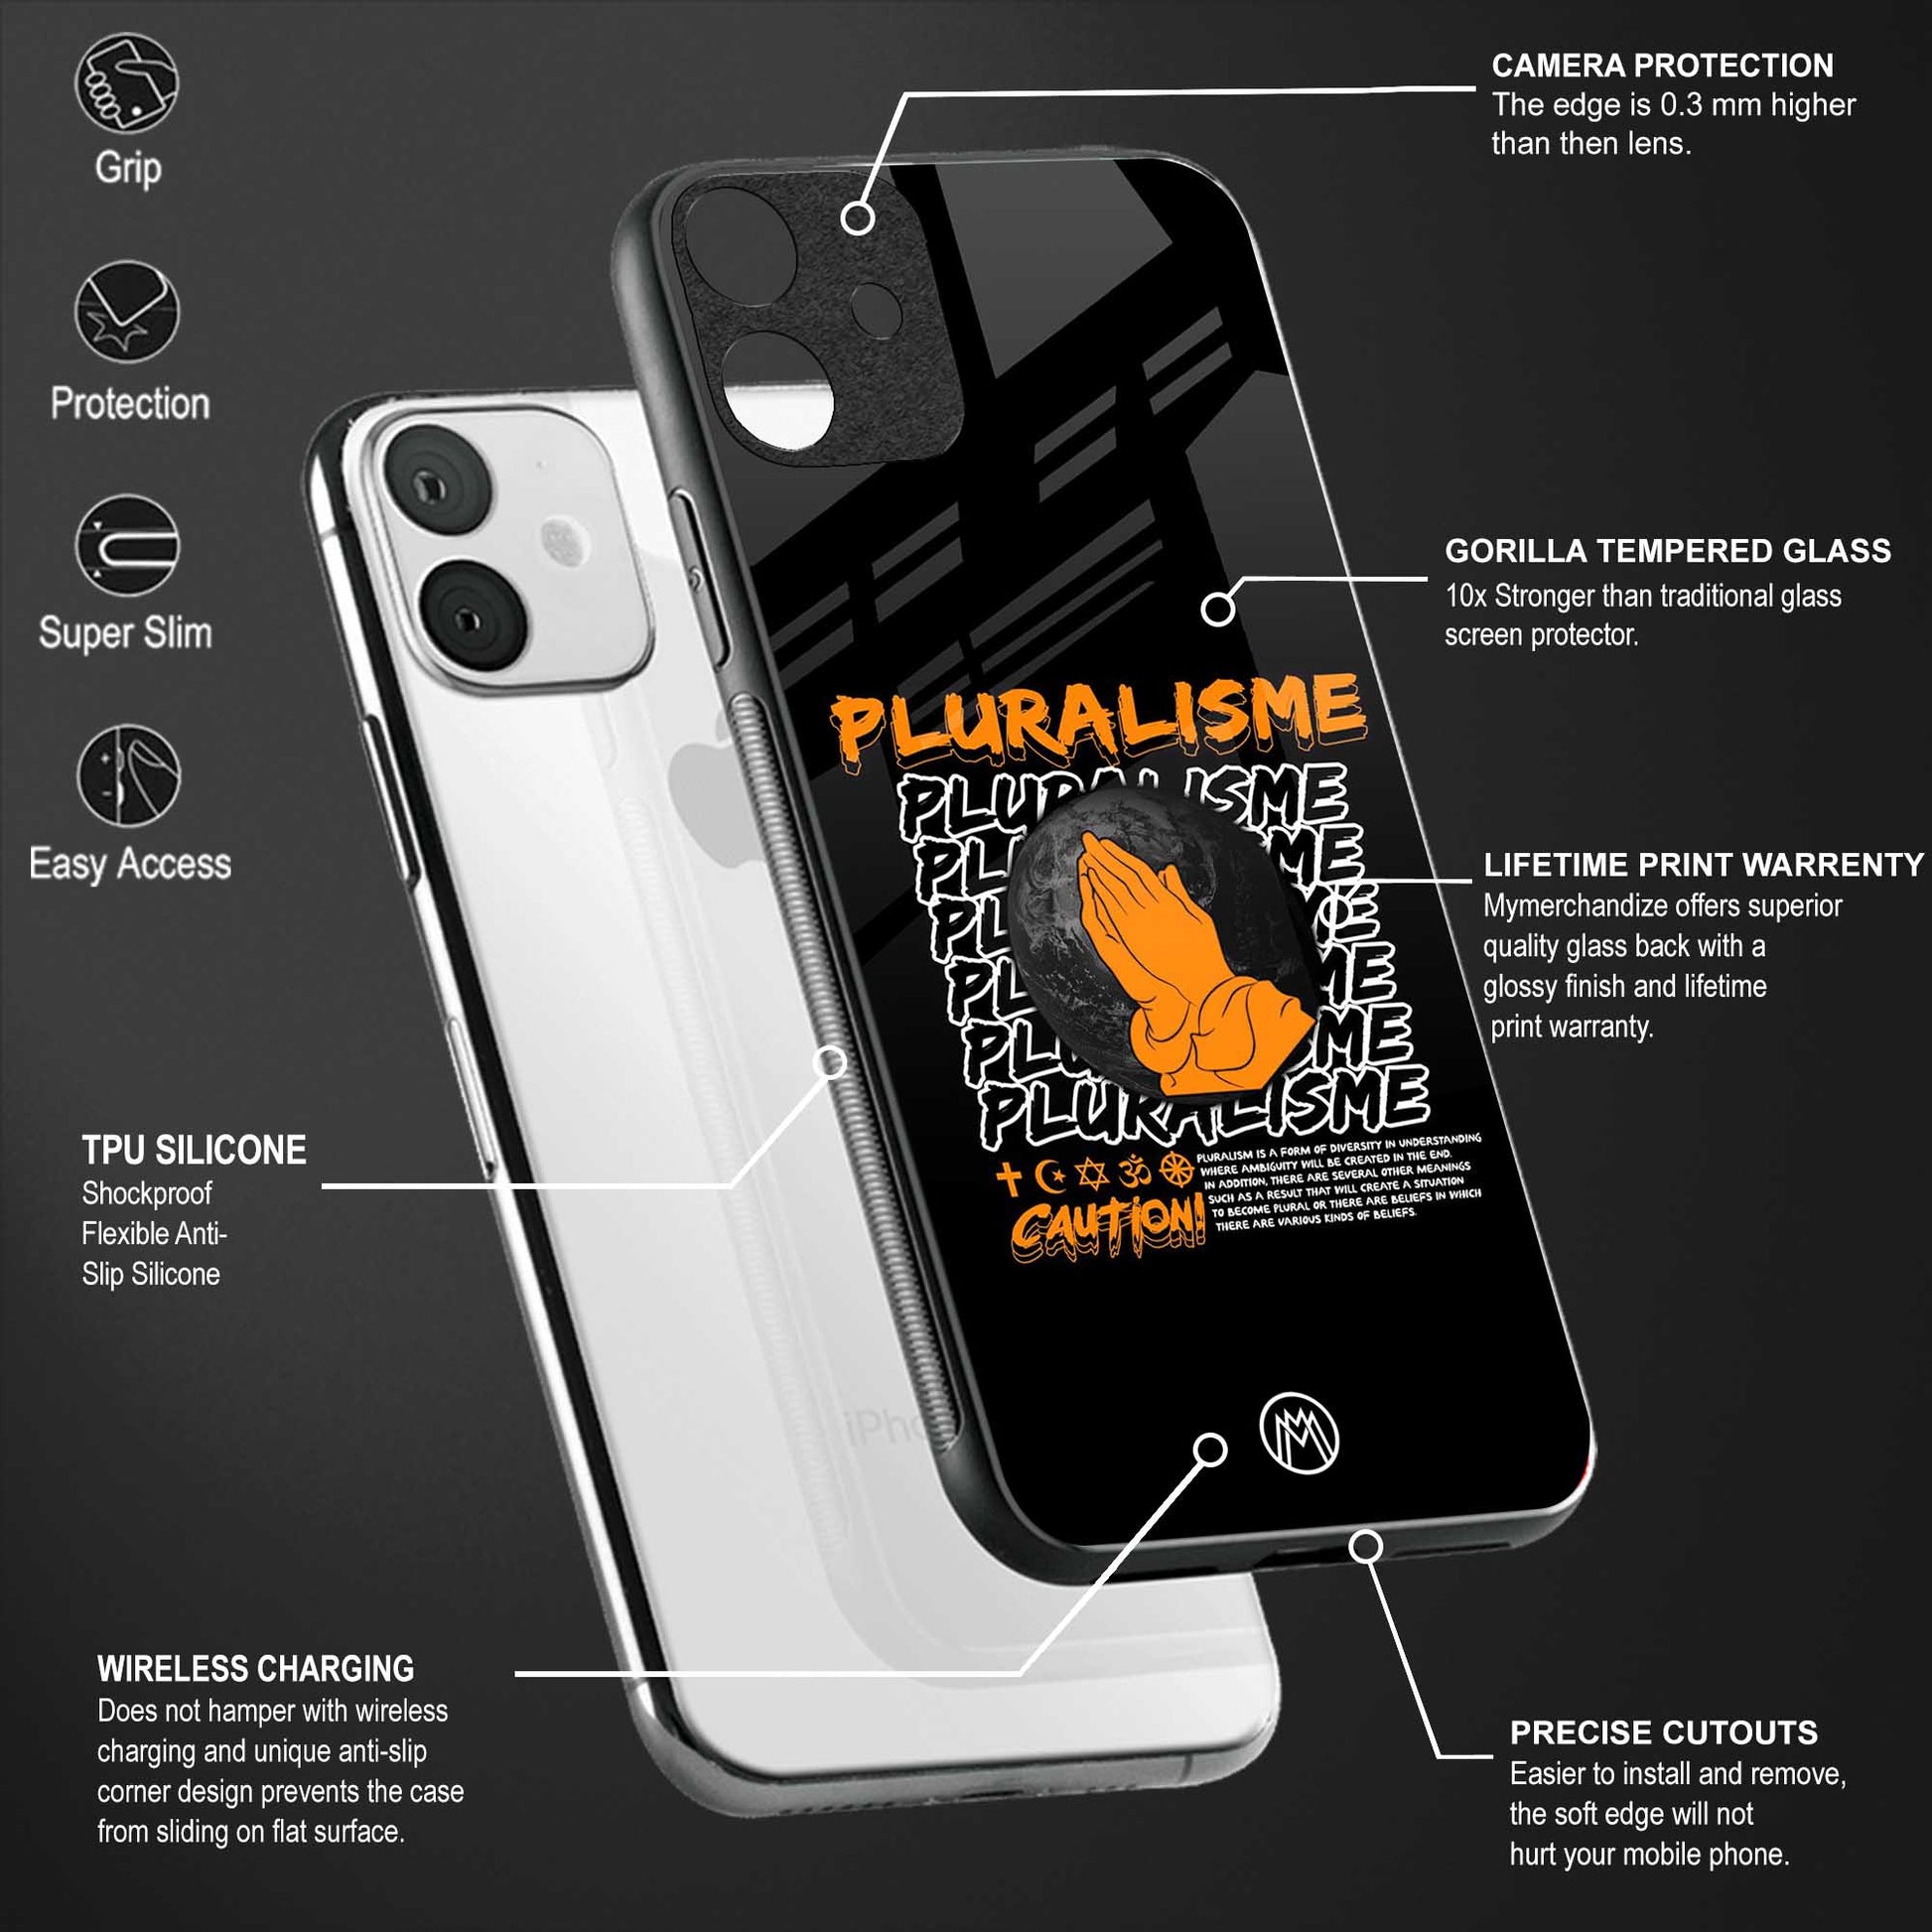 pluralisme glass case for phone case | glass case for samsung galaxy s23 plus